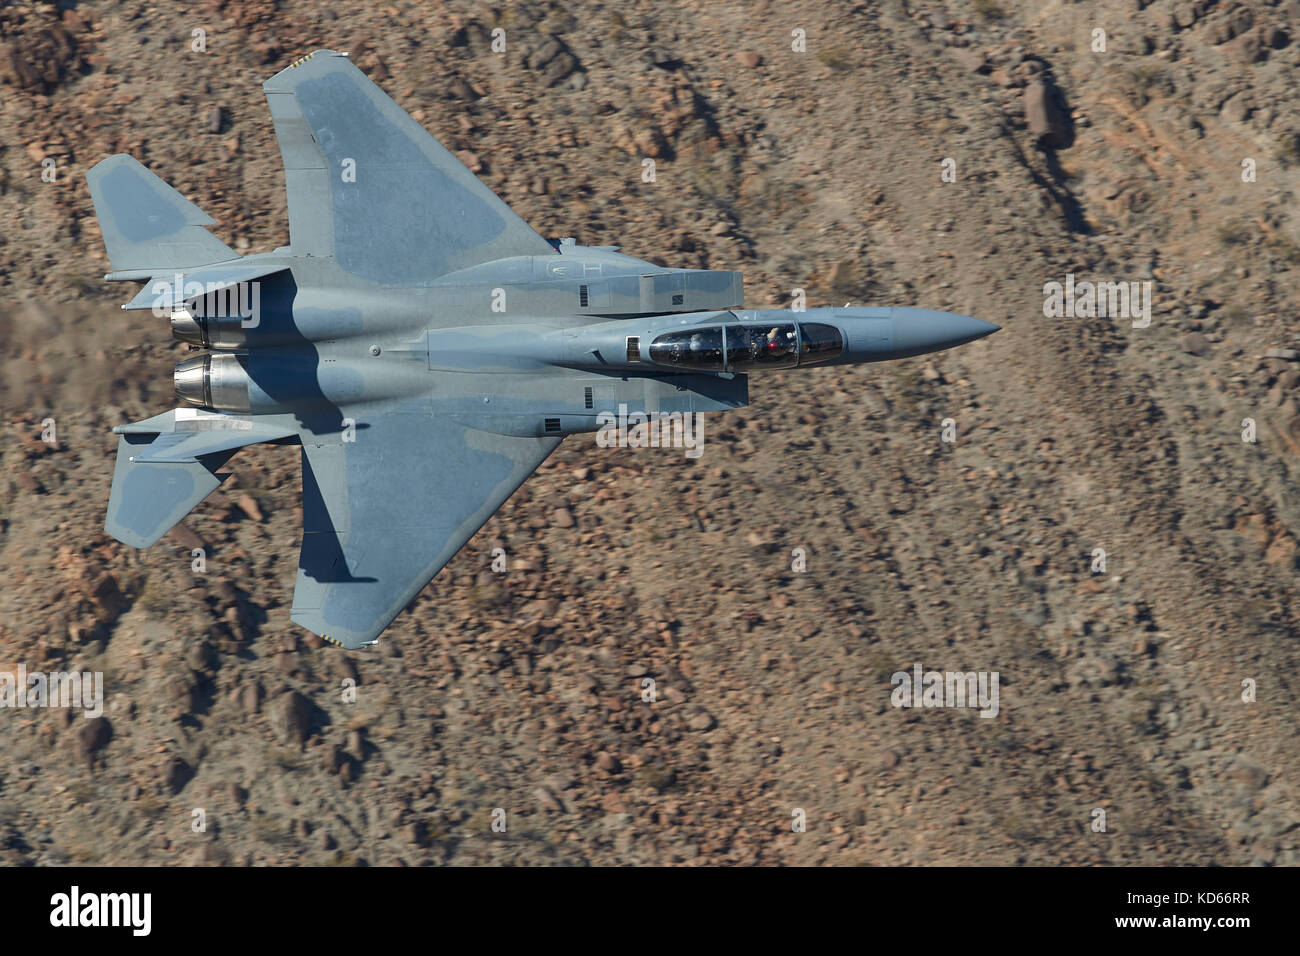 Boeing (McDonnell Douglas), F-15SA Eagle, Jet Fighter, Flying At Low Level Through Rainbow Canyon In Death Valley National Park, California, USA. Stock Photo